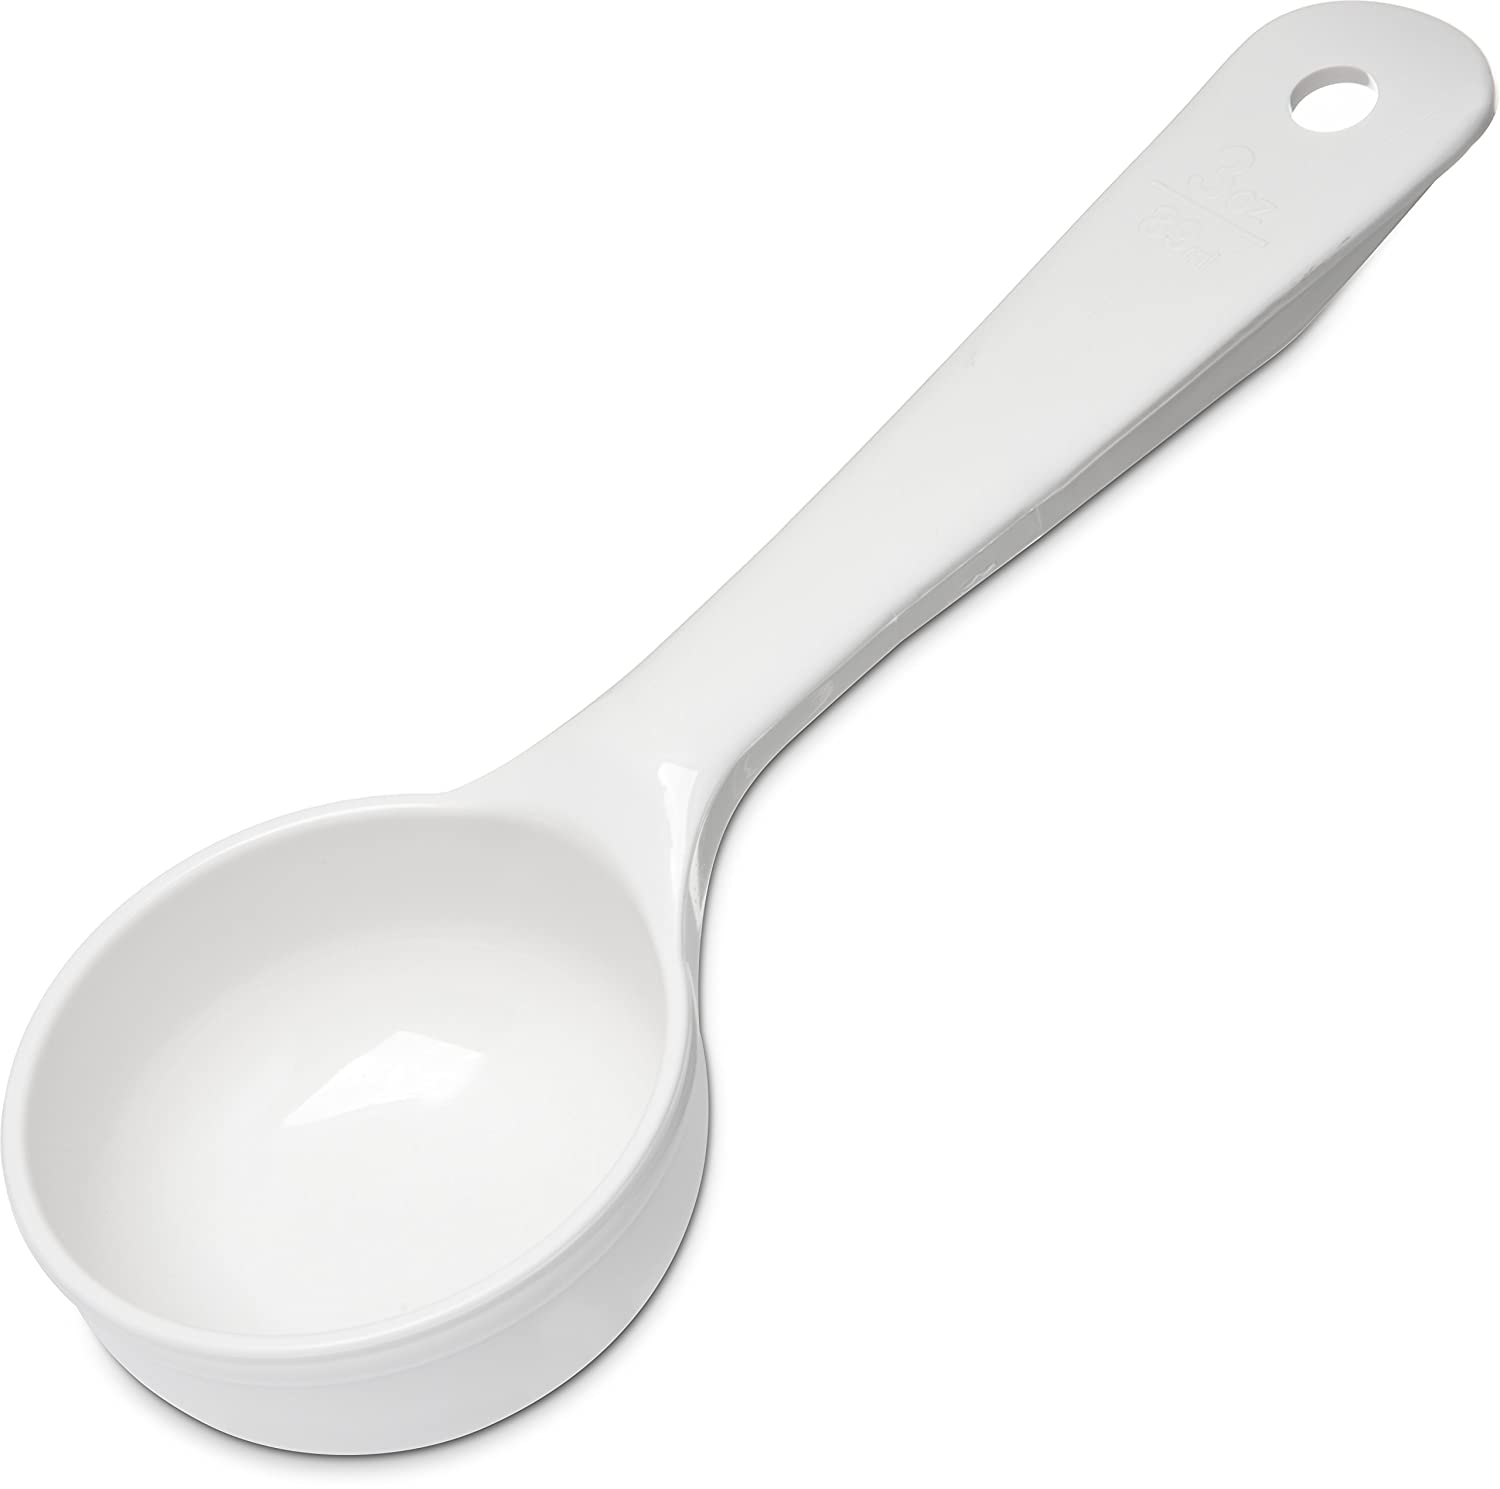 CFS Measure Miser Solid Measuring Spoon with Short Handle, 1 Ounce, Yellow Import To Shop ×Product customization General